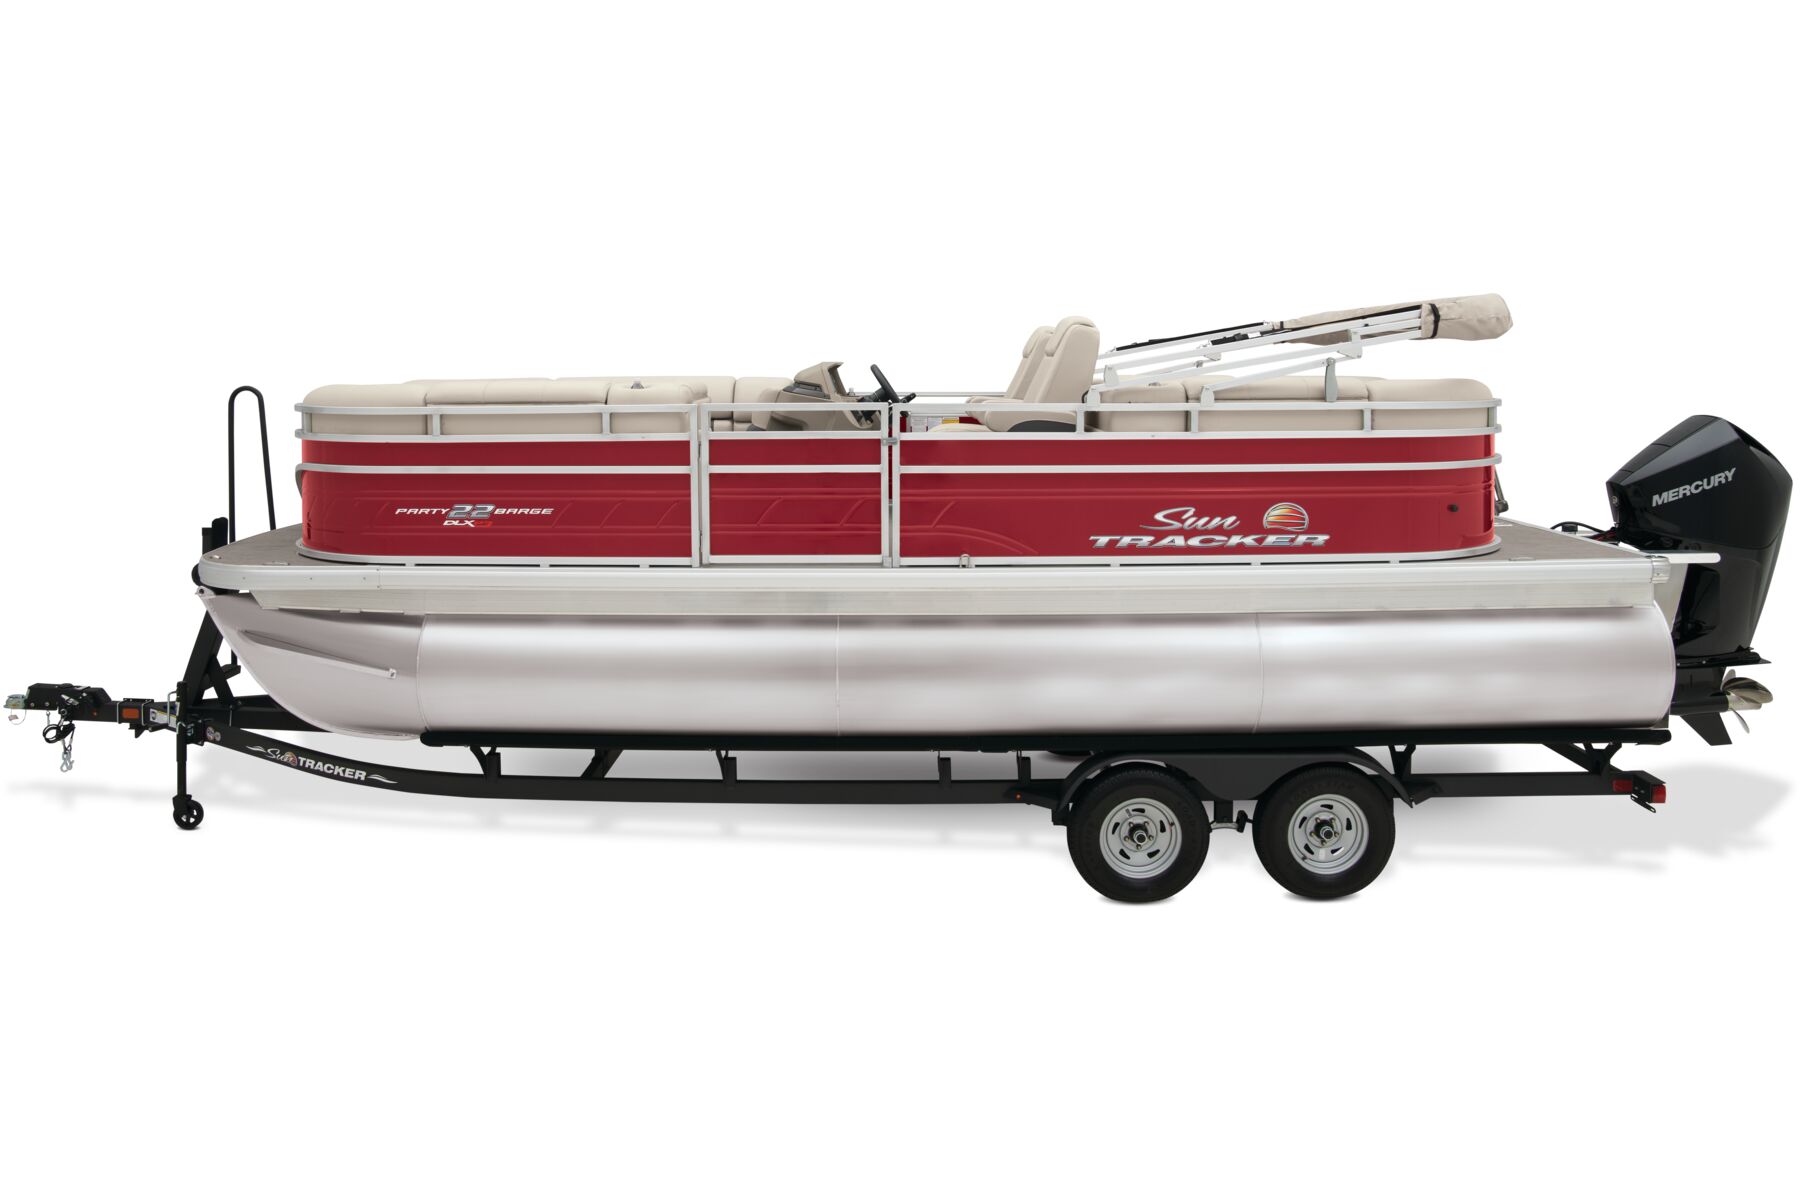 PARTY BARGE 22 XP3 - SUN TRACKER Recreational Pontoon Boat